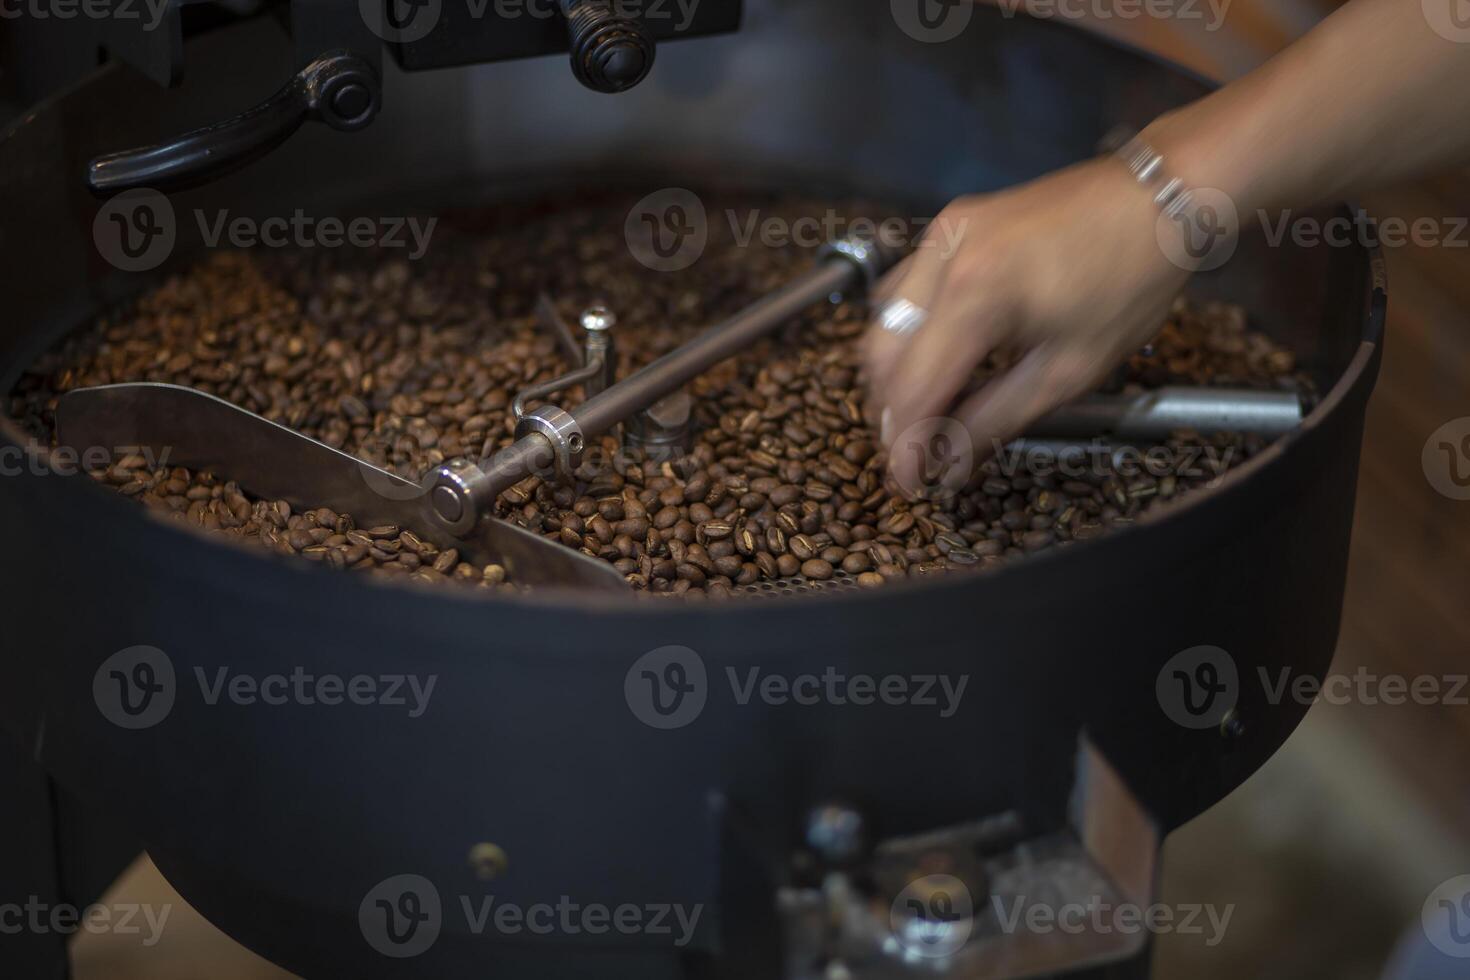 Coffee beans during the roasting process photo